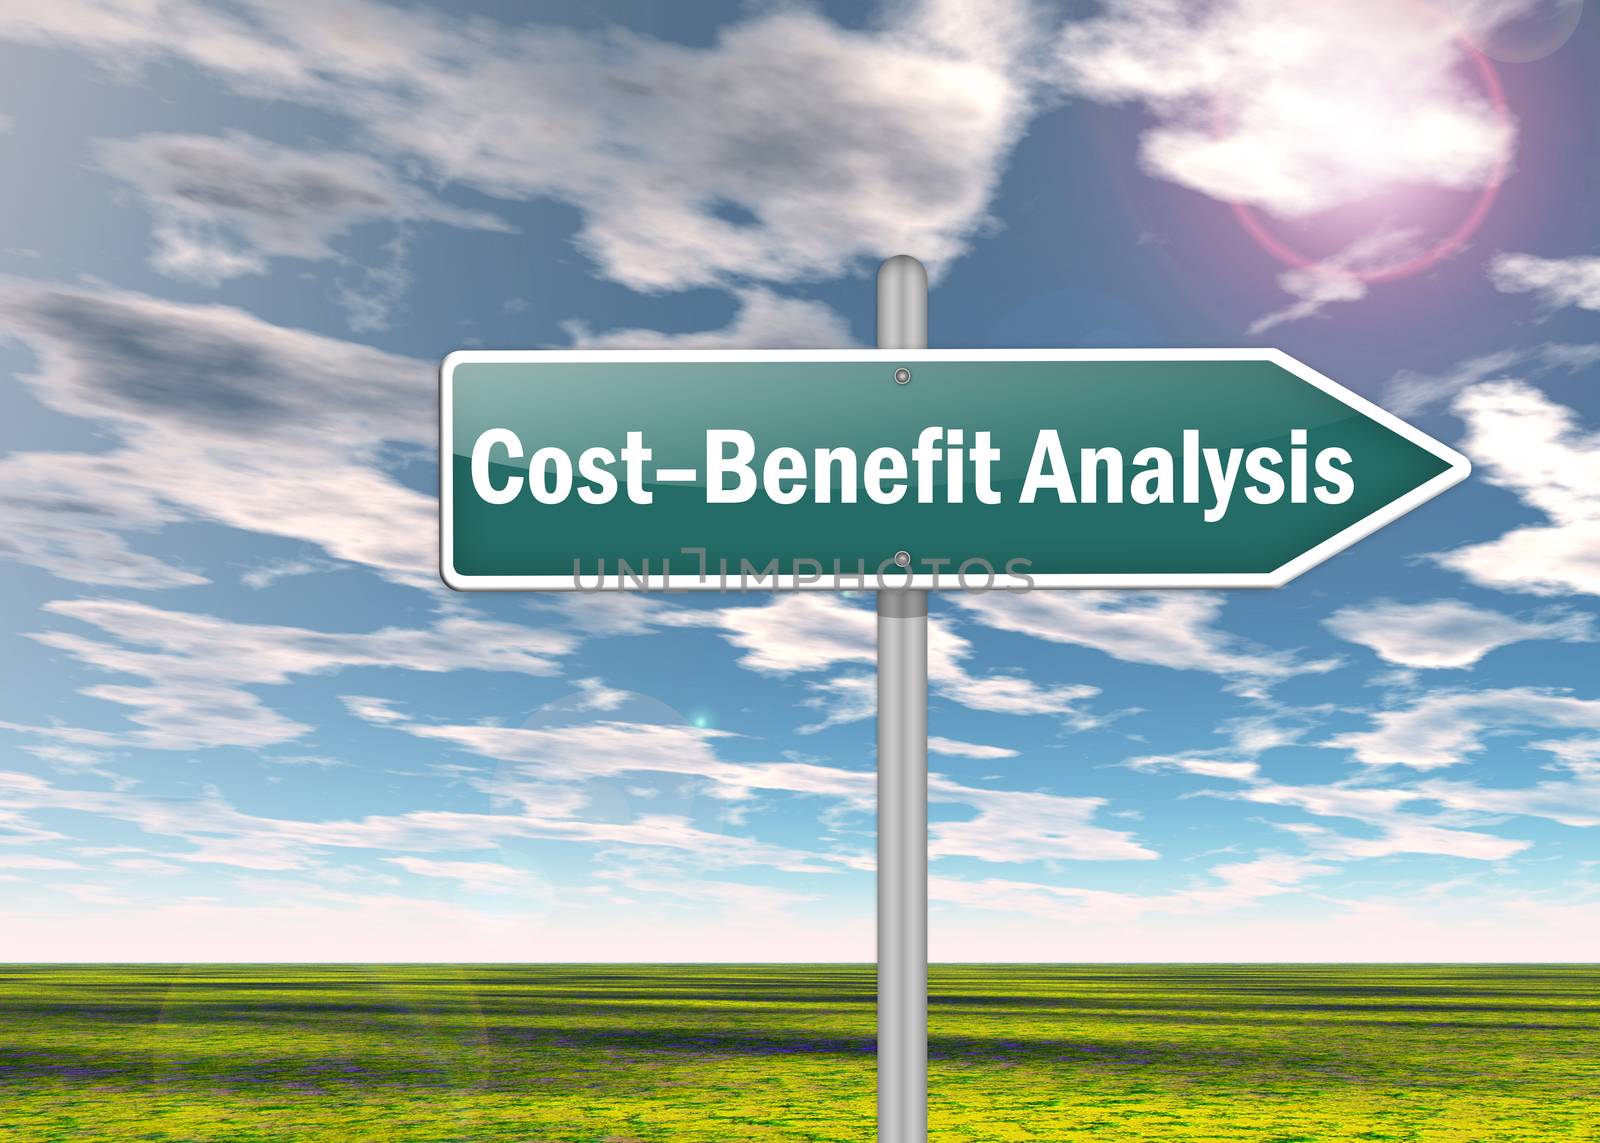 Signpost "Cost-Benefit Analysis"